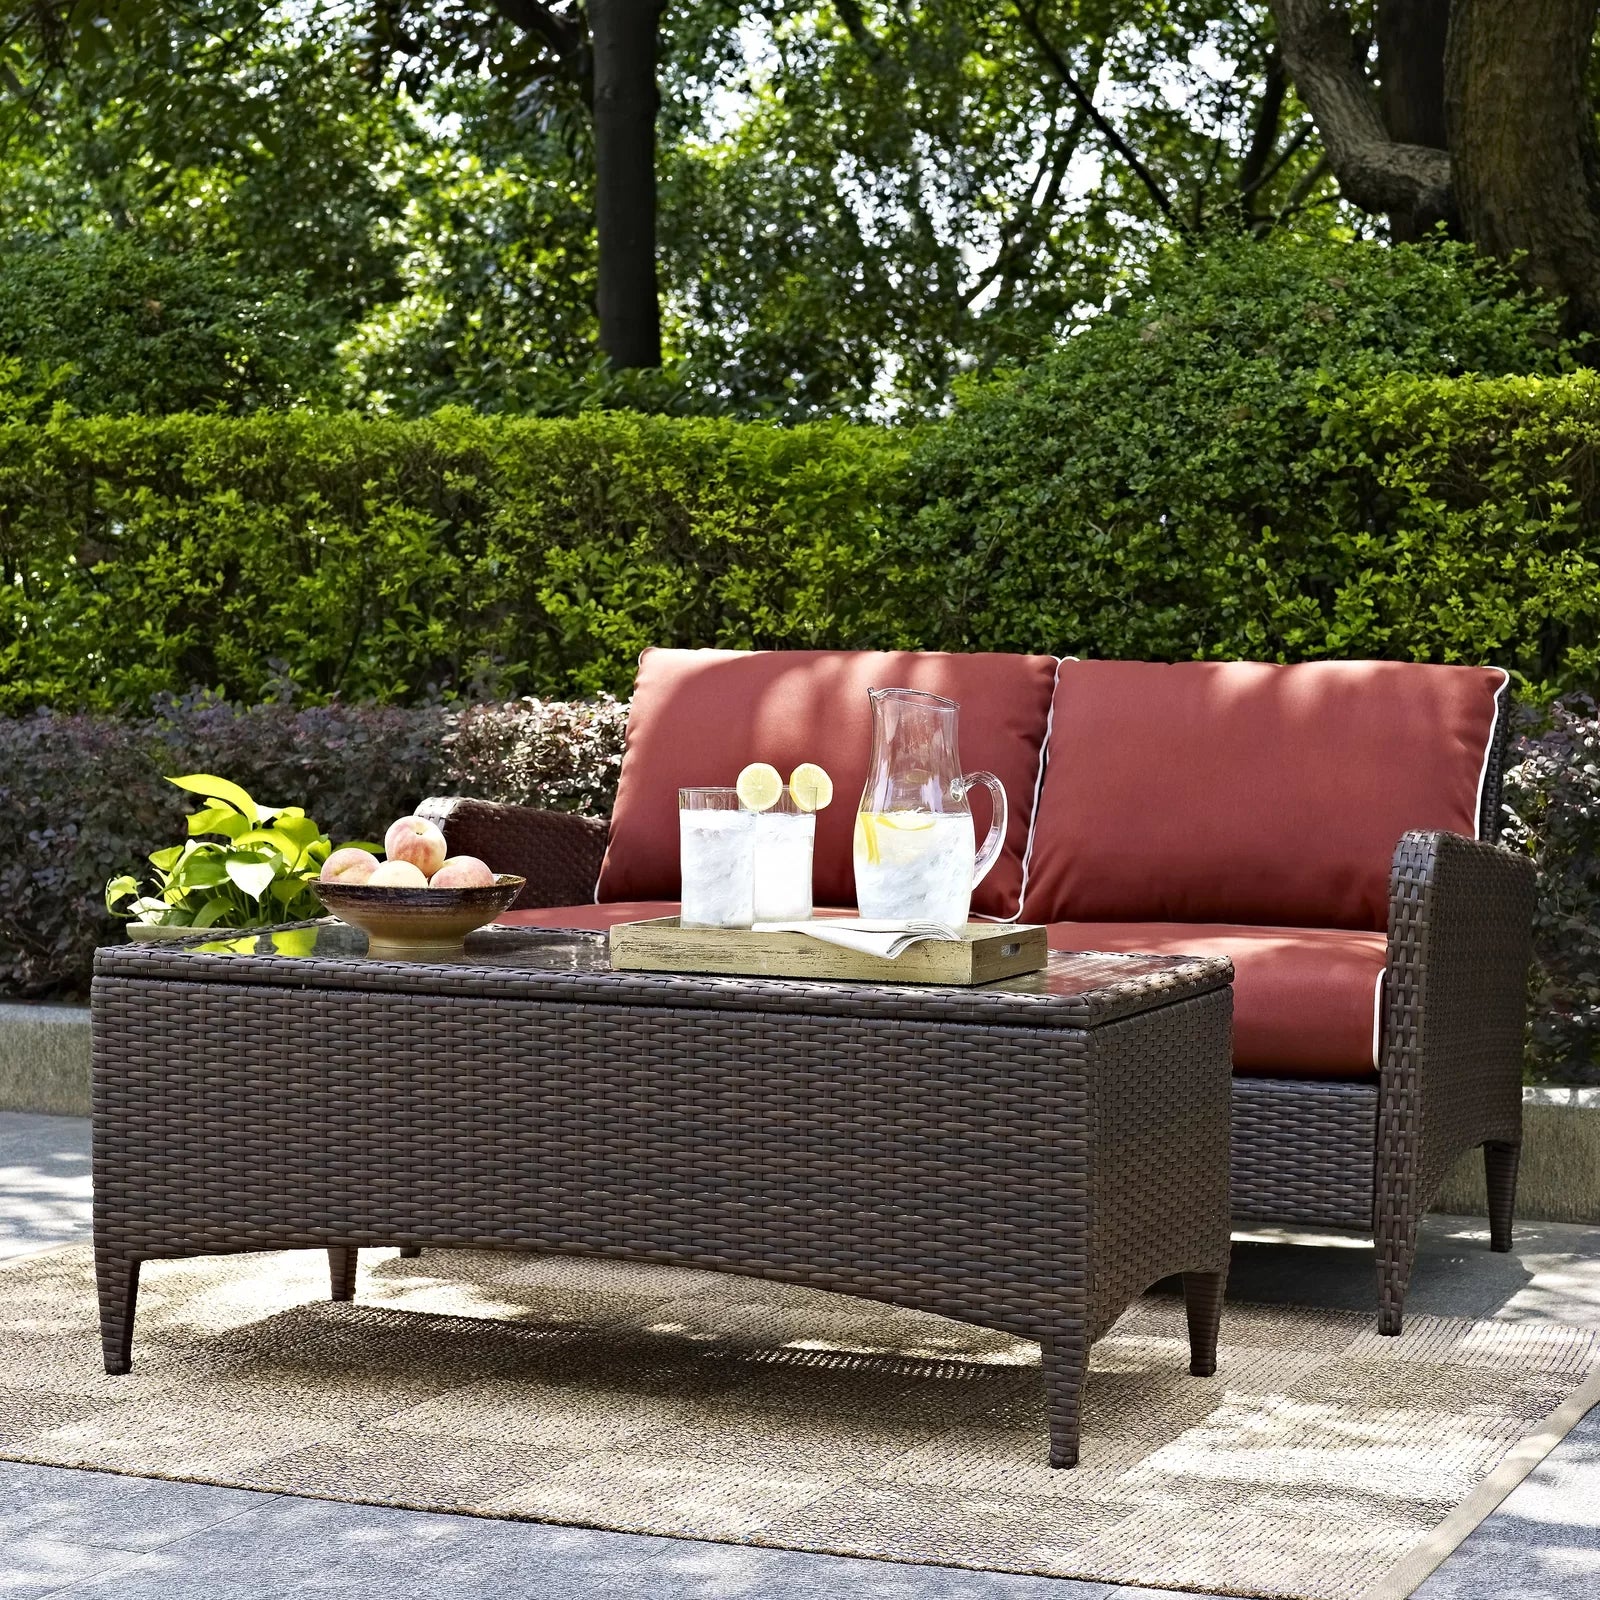 OUTDOOR 2 SEATER SOFA AND 1 CENTER TABLE